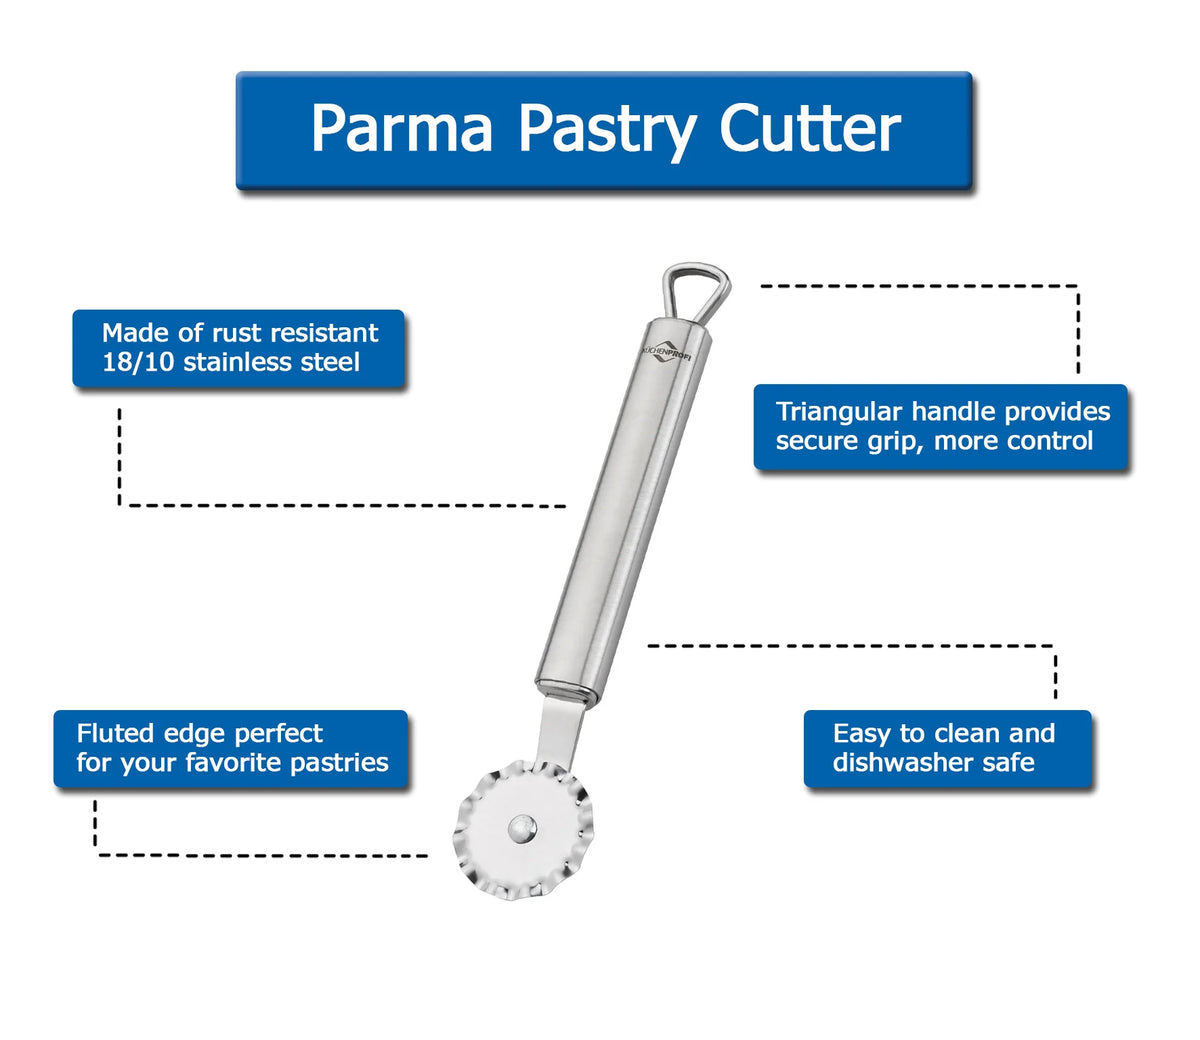 Parma Pastry Cutter - Frieling - Bluecashew Kitchen Homestead